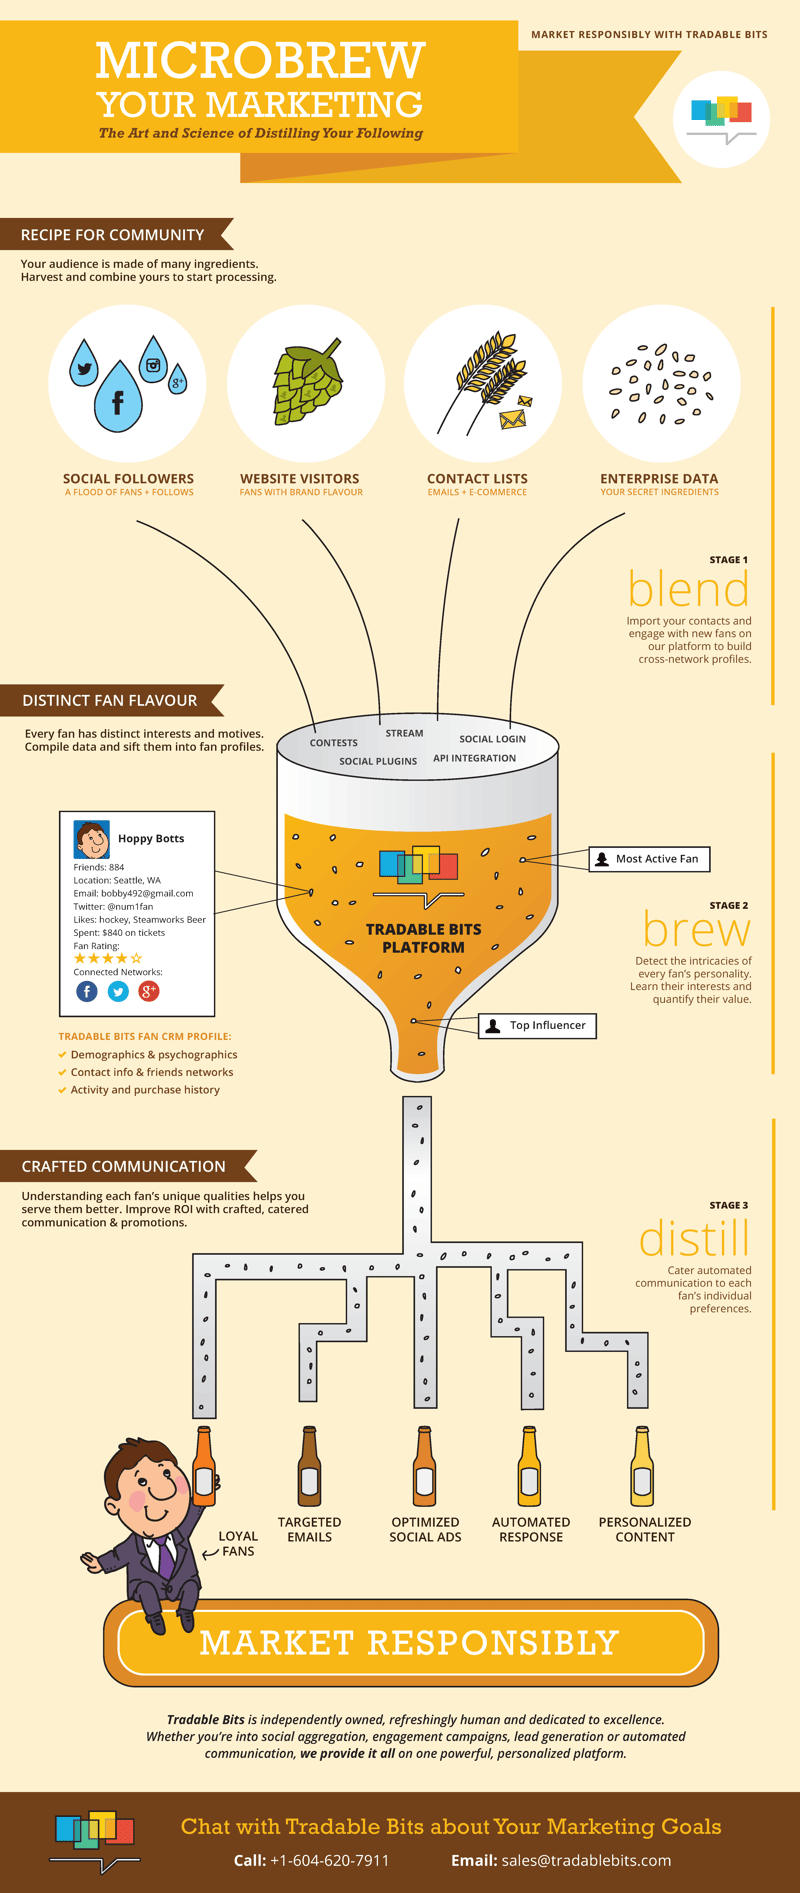 microbrew-your-marketing-infographic-tradable-bits